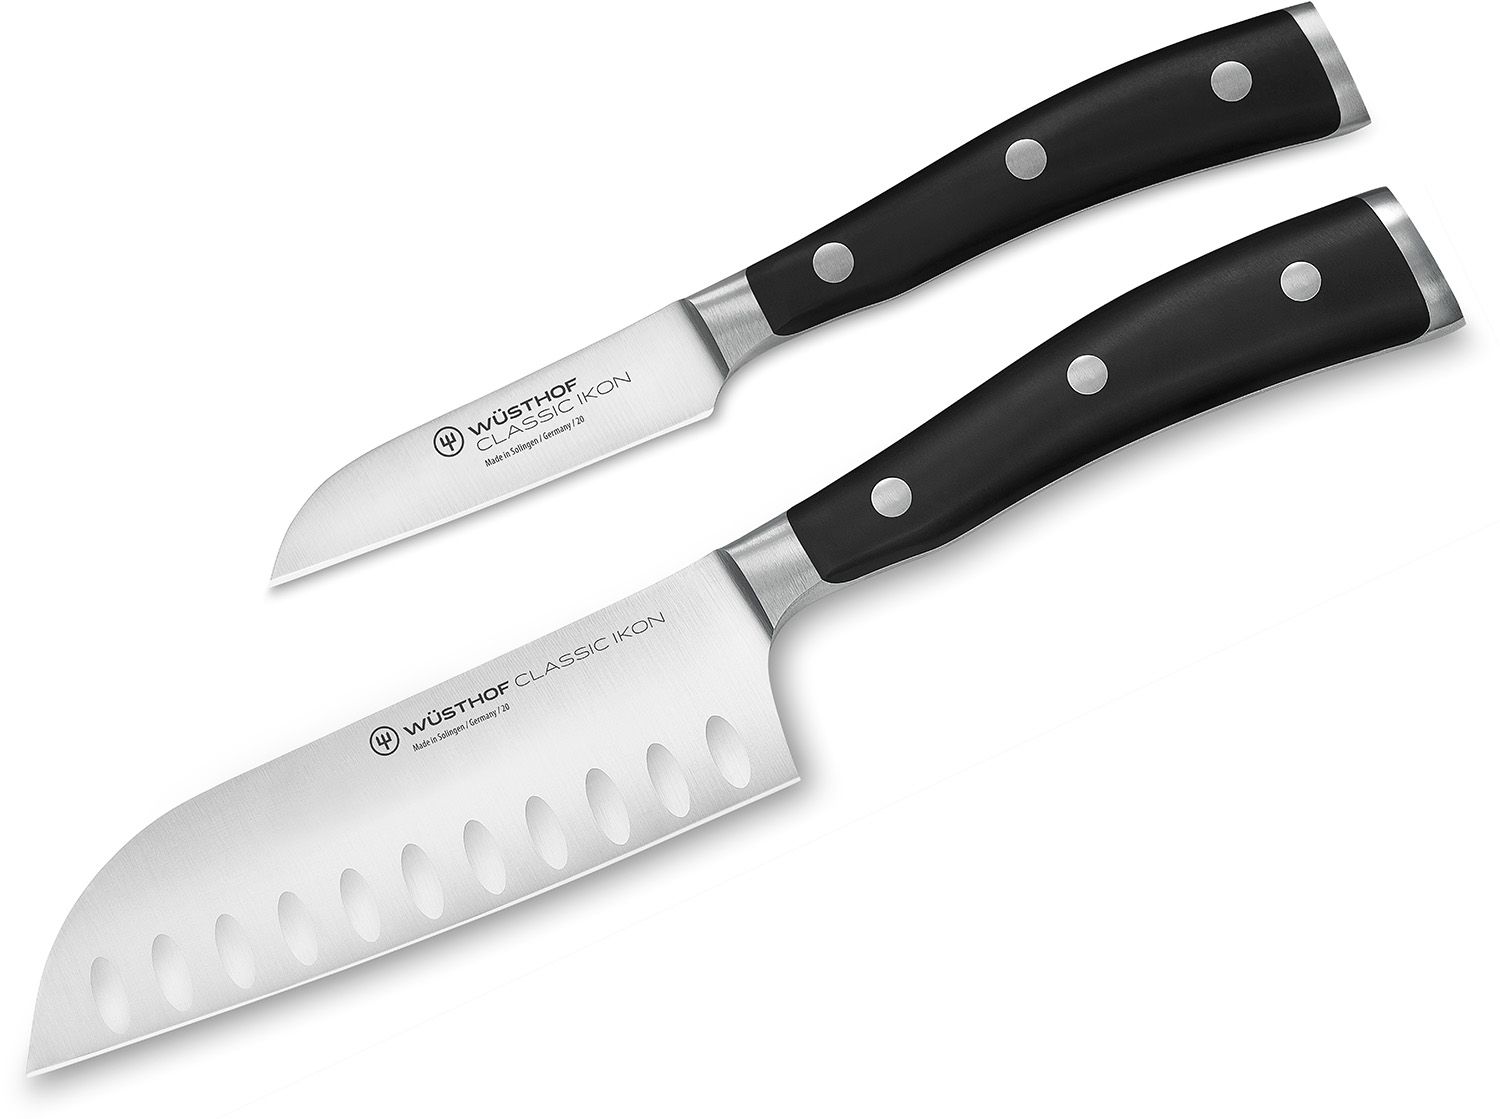 Wusthof Classic Ikon Series Carbon Stainless Steel Knife Sets